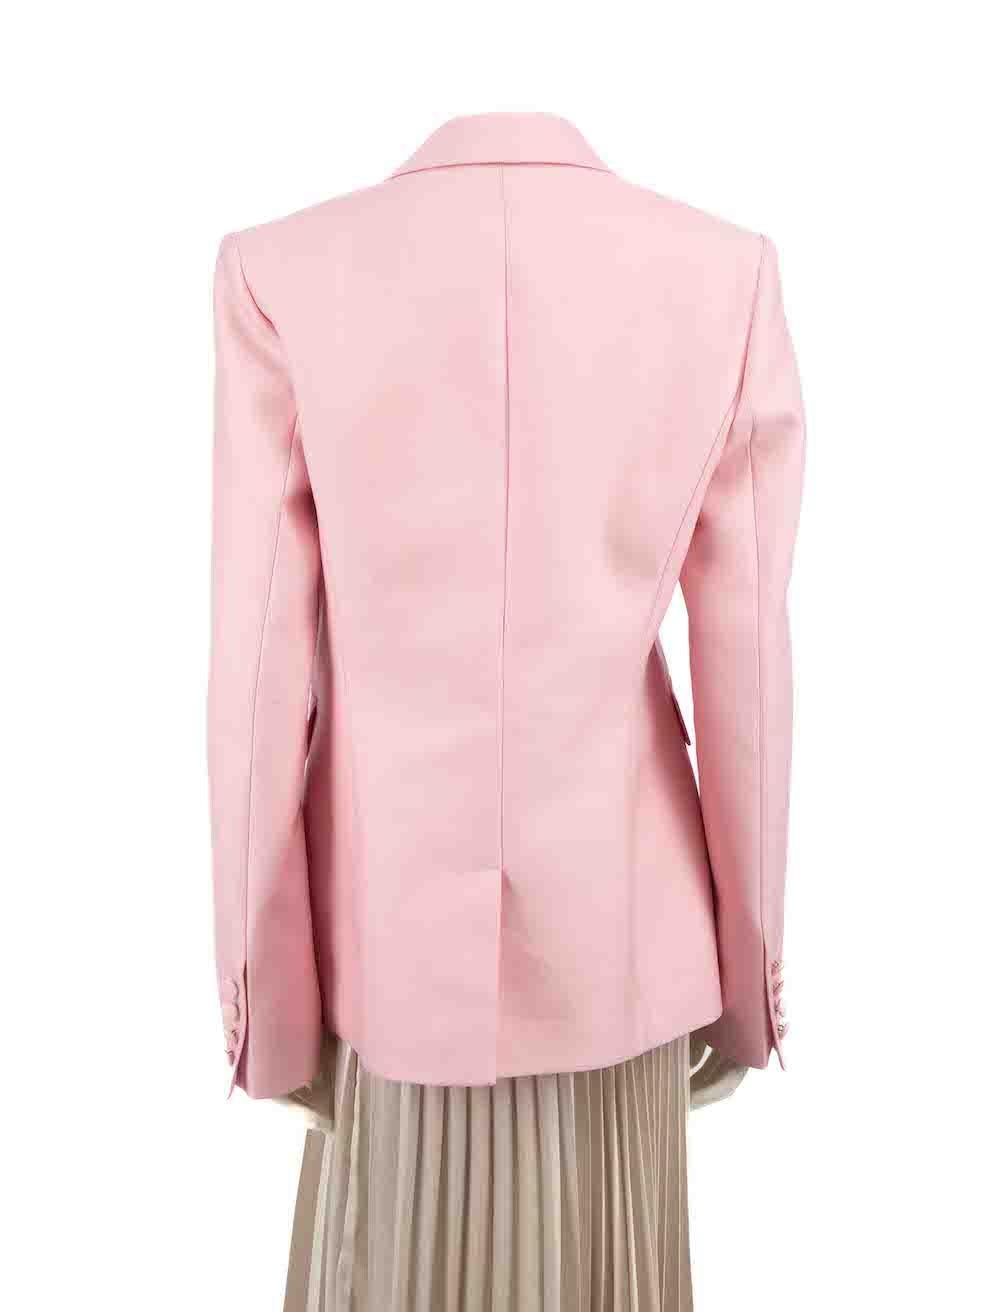 Gabriela Hearst Pink Wool Tailored Blazer Size XL In Good Condition For Sale In London, GB